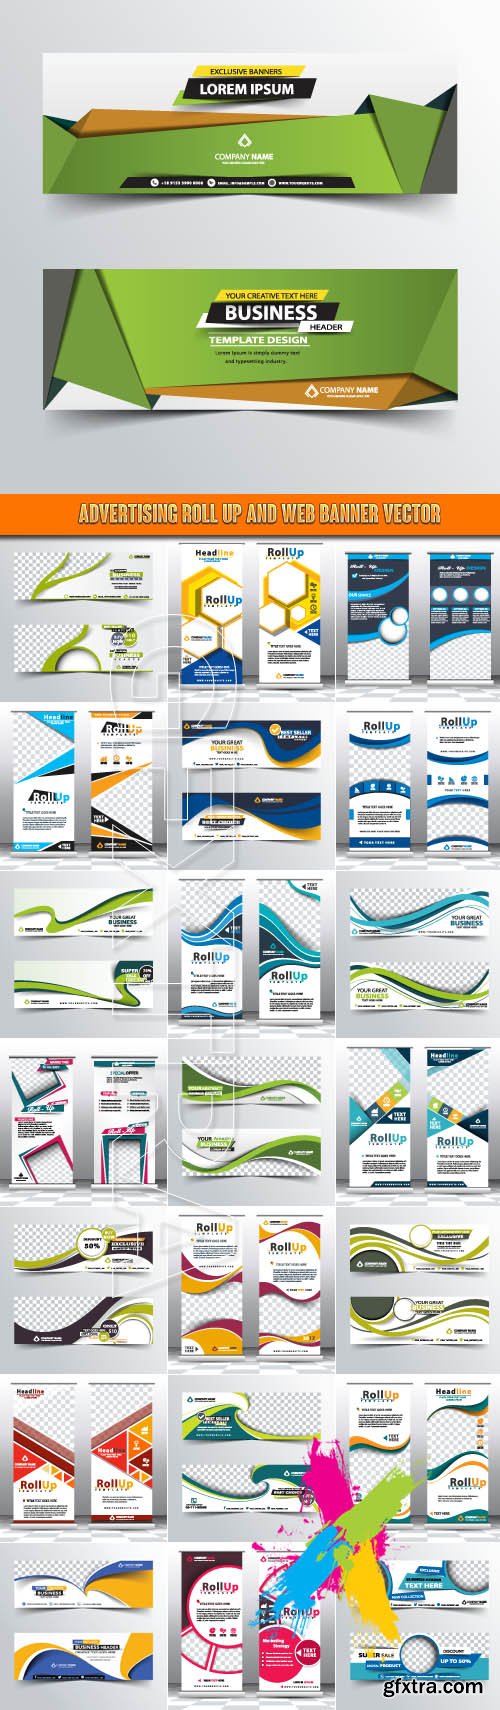 Advertising Roll up and web banner vector